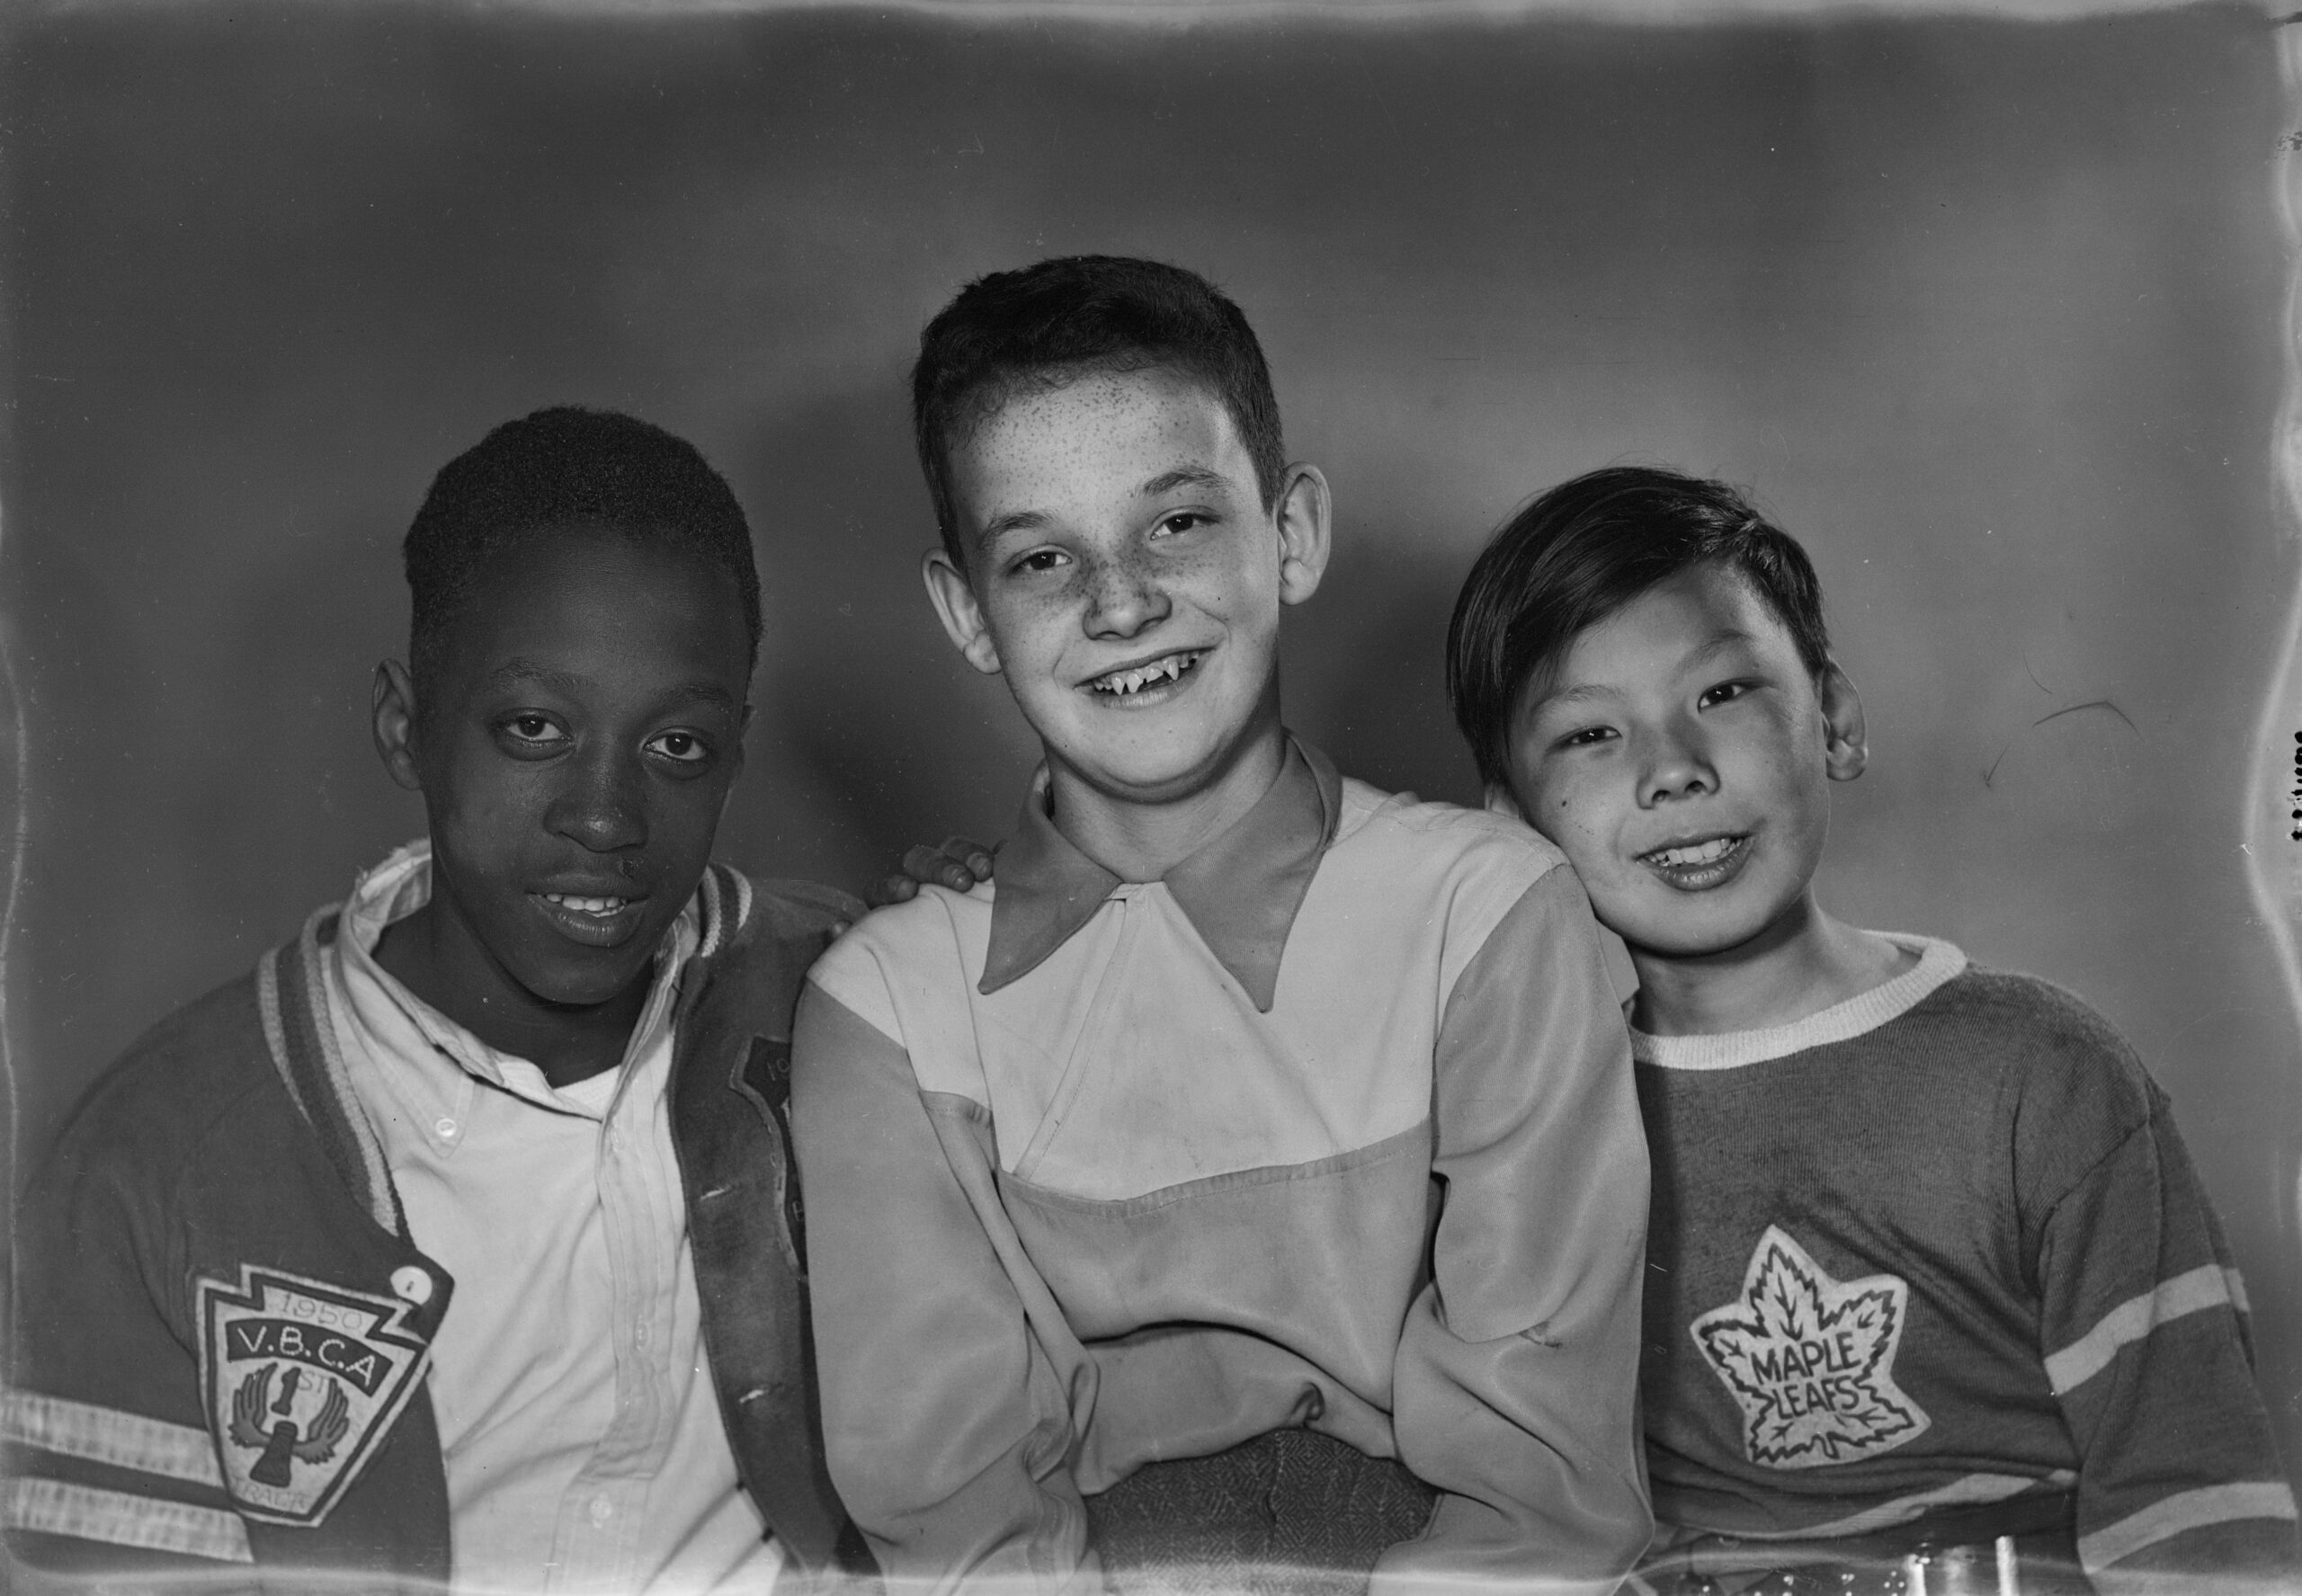 Three boys from the Vancouver Boys Club Association, 1950. Reference code: AM1545-S3-: CVA 586-13418